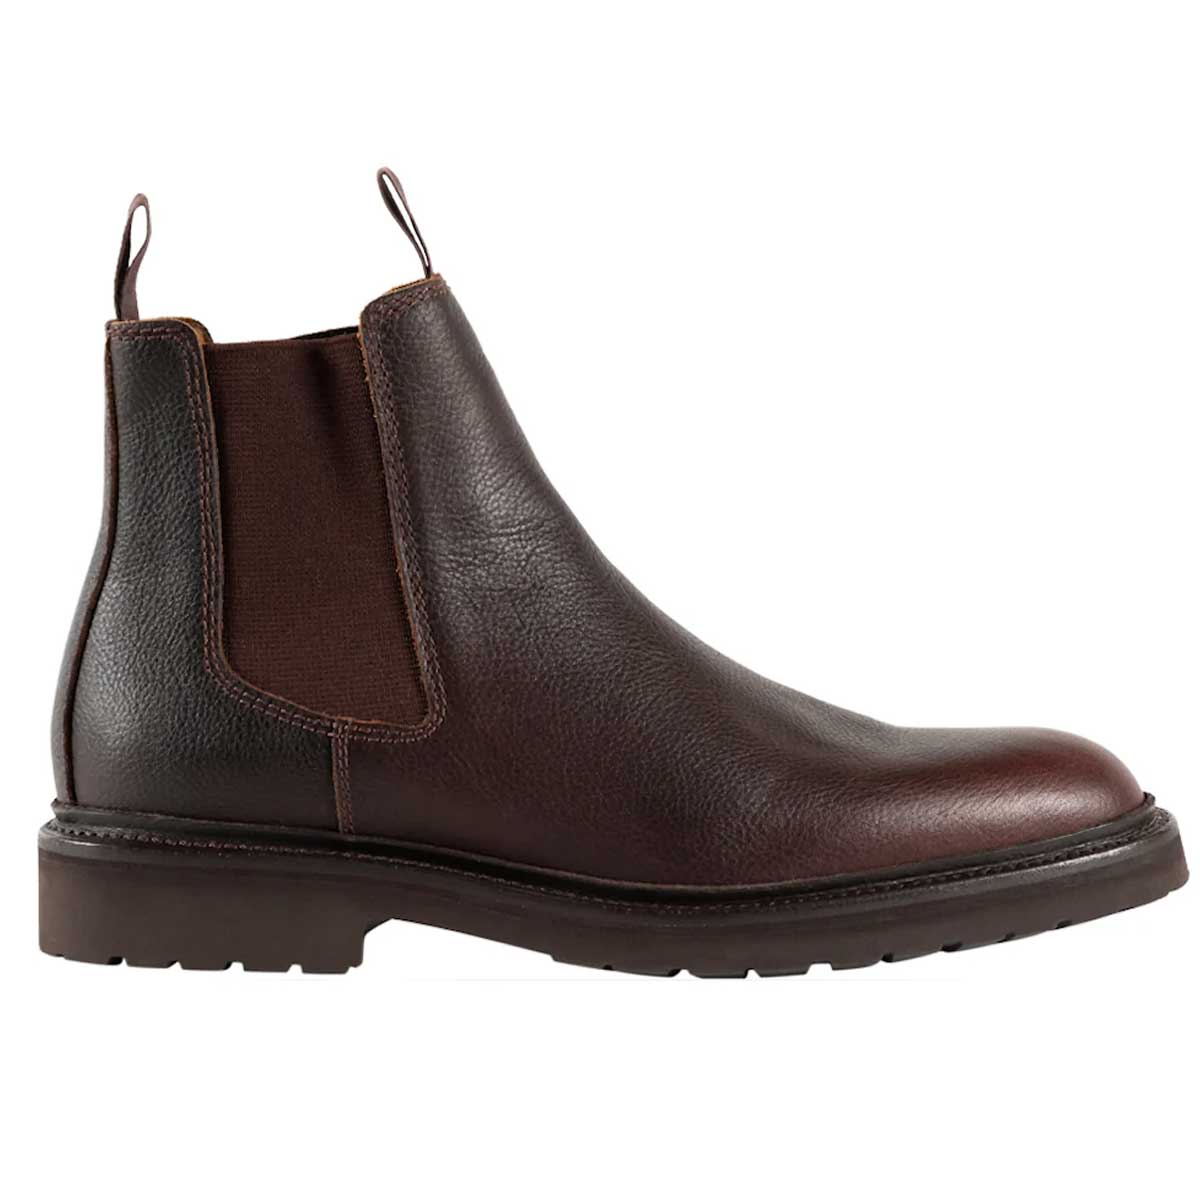 BARKER Camborne Xtra Lite Chelsea Boots - Mens - Brown Grain Pull Up